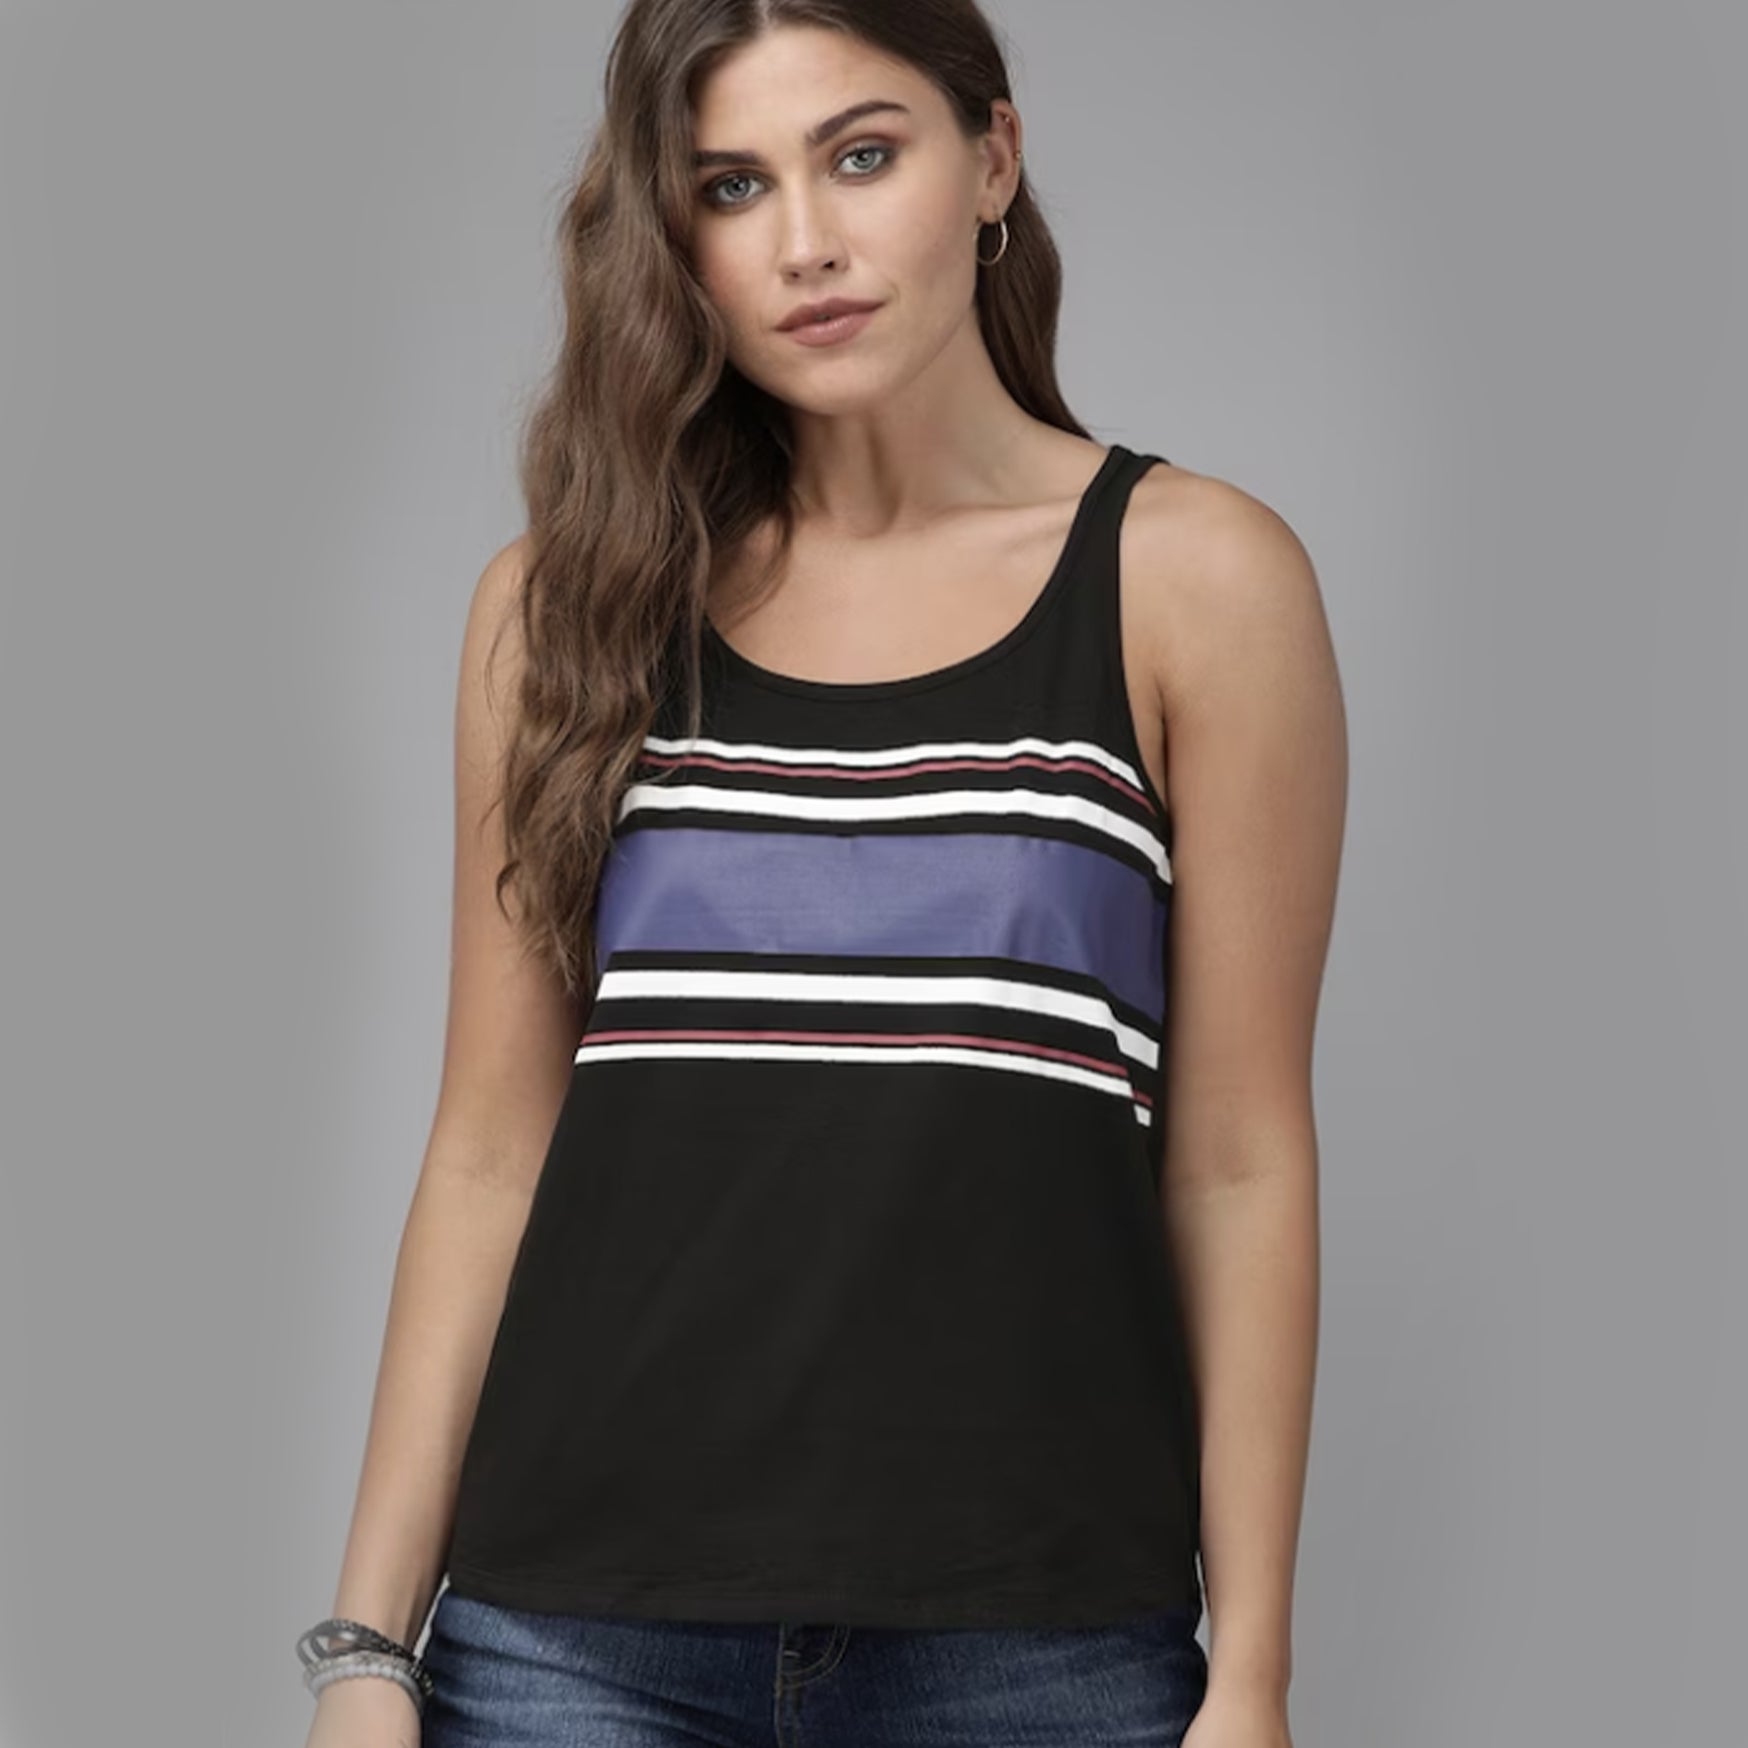 The Lifestyle Co Black Blue Striped Pure Cotton Regular Top